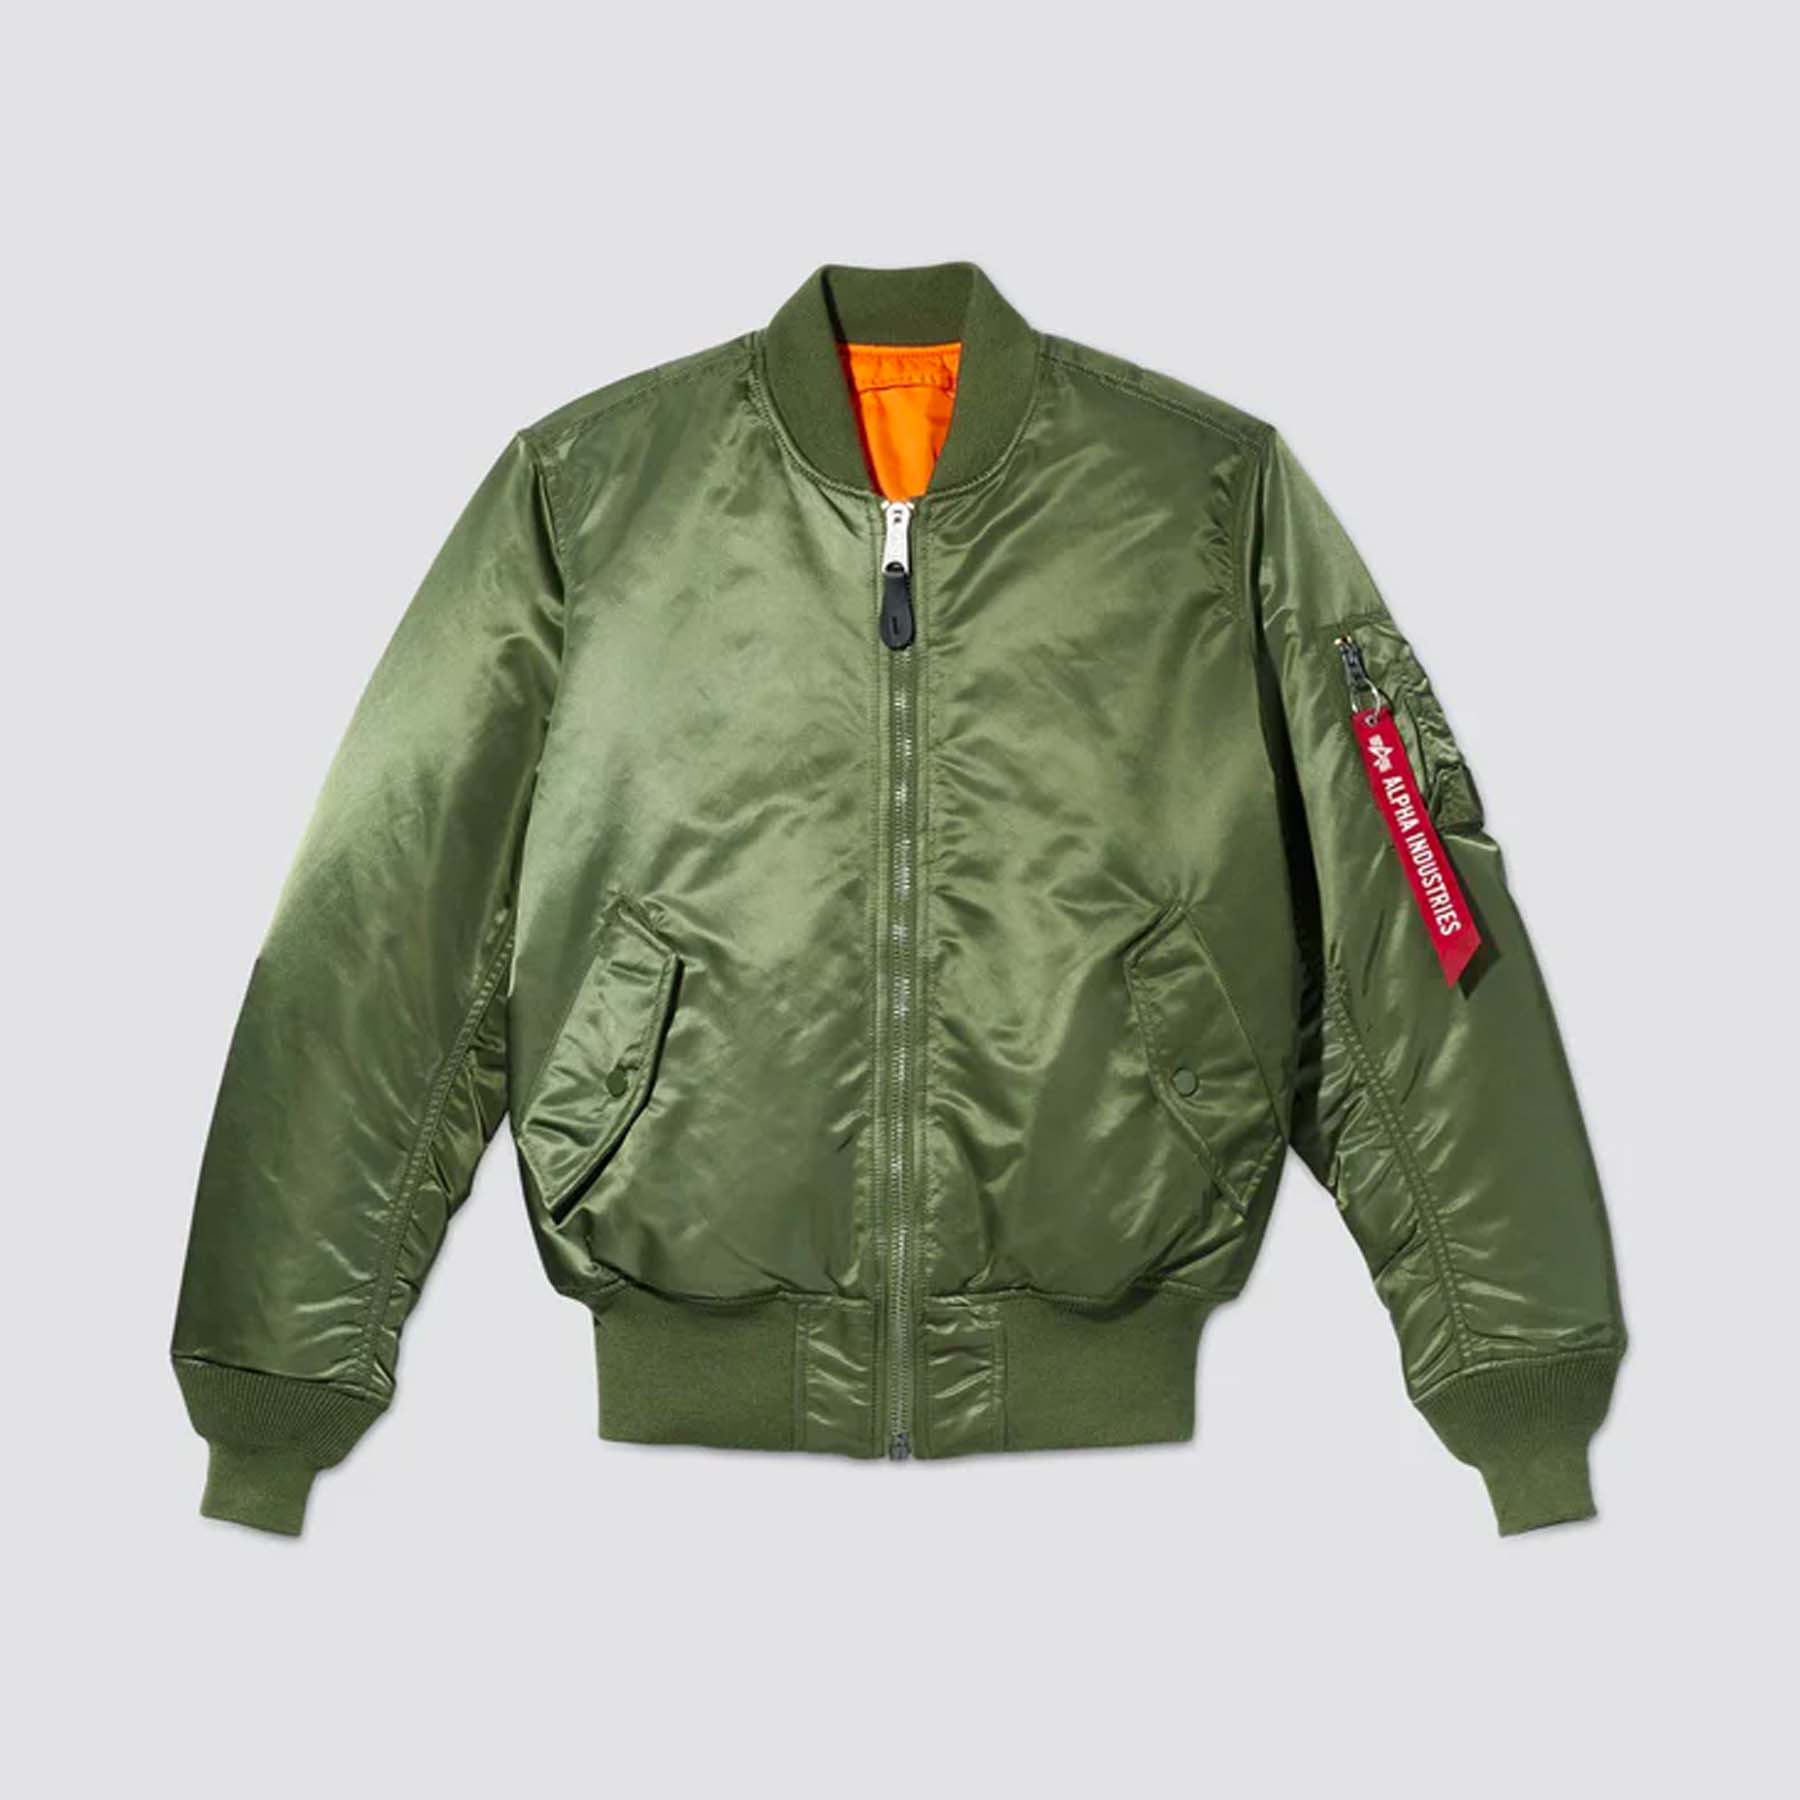 Our Editors' 6 Favorite Bomber Jackets